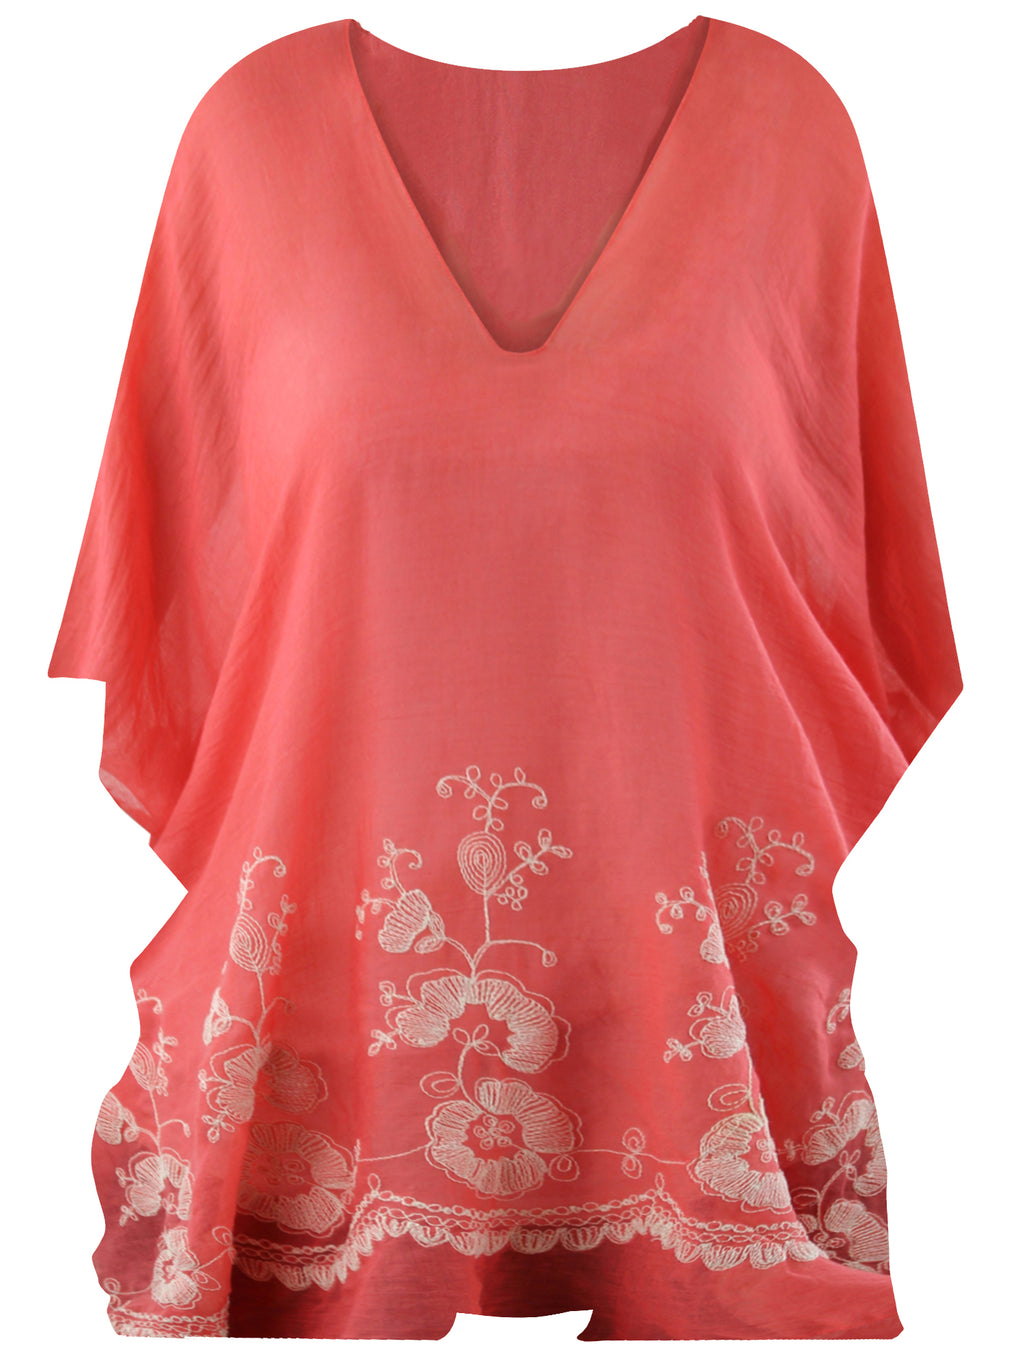 Coral Crochet Trim Beach Cover-Up Top